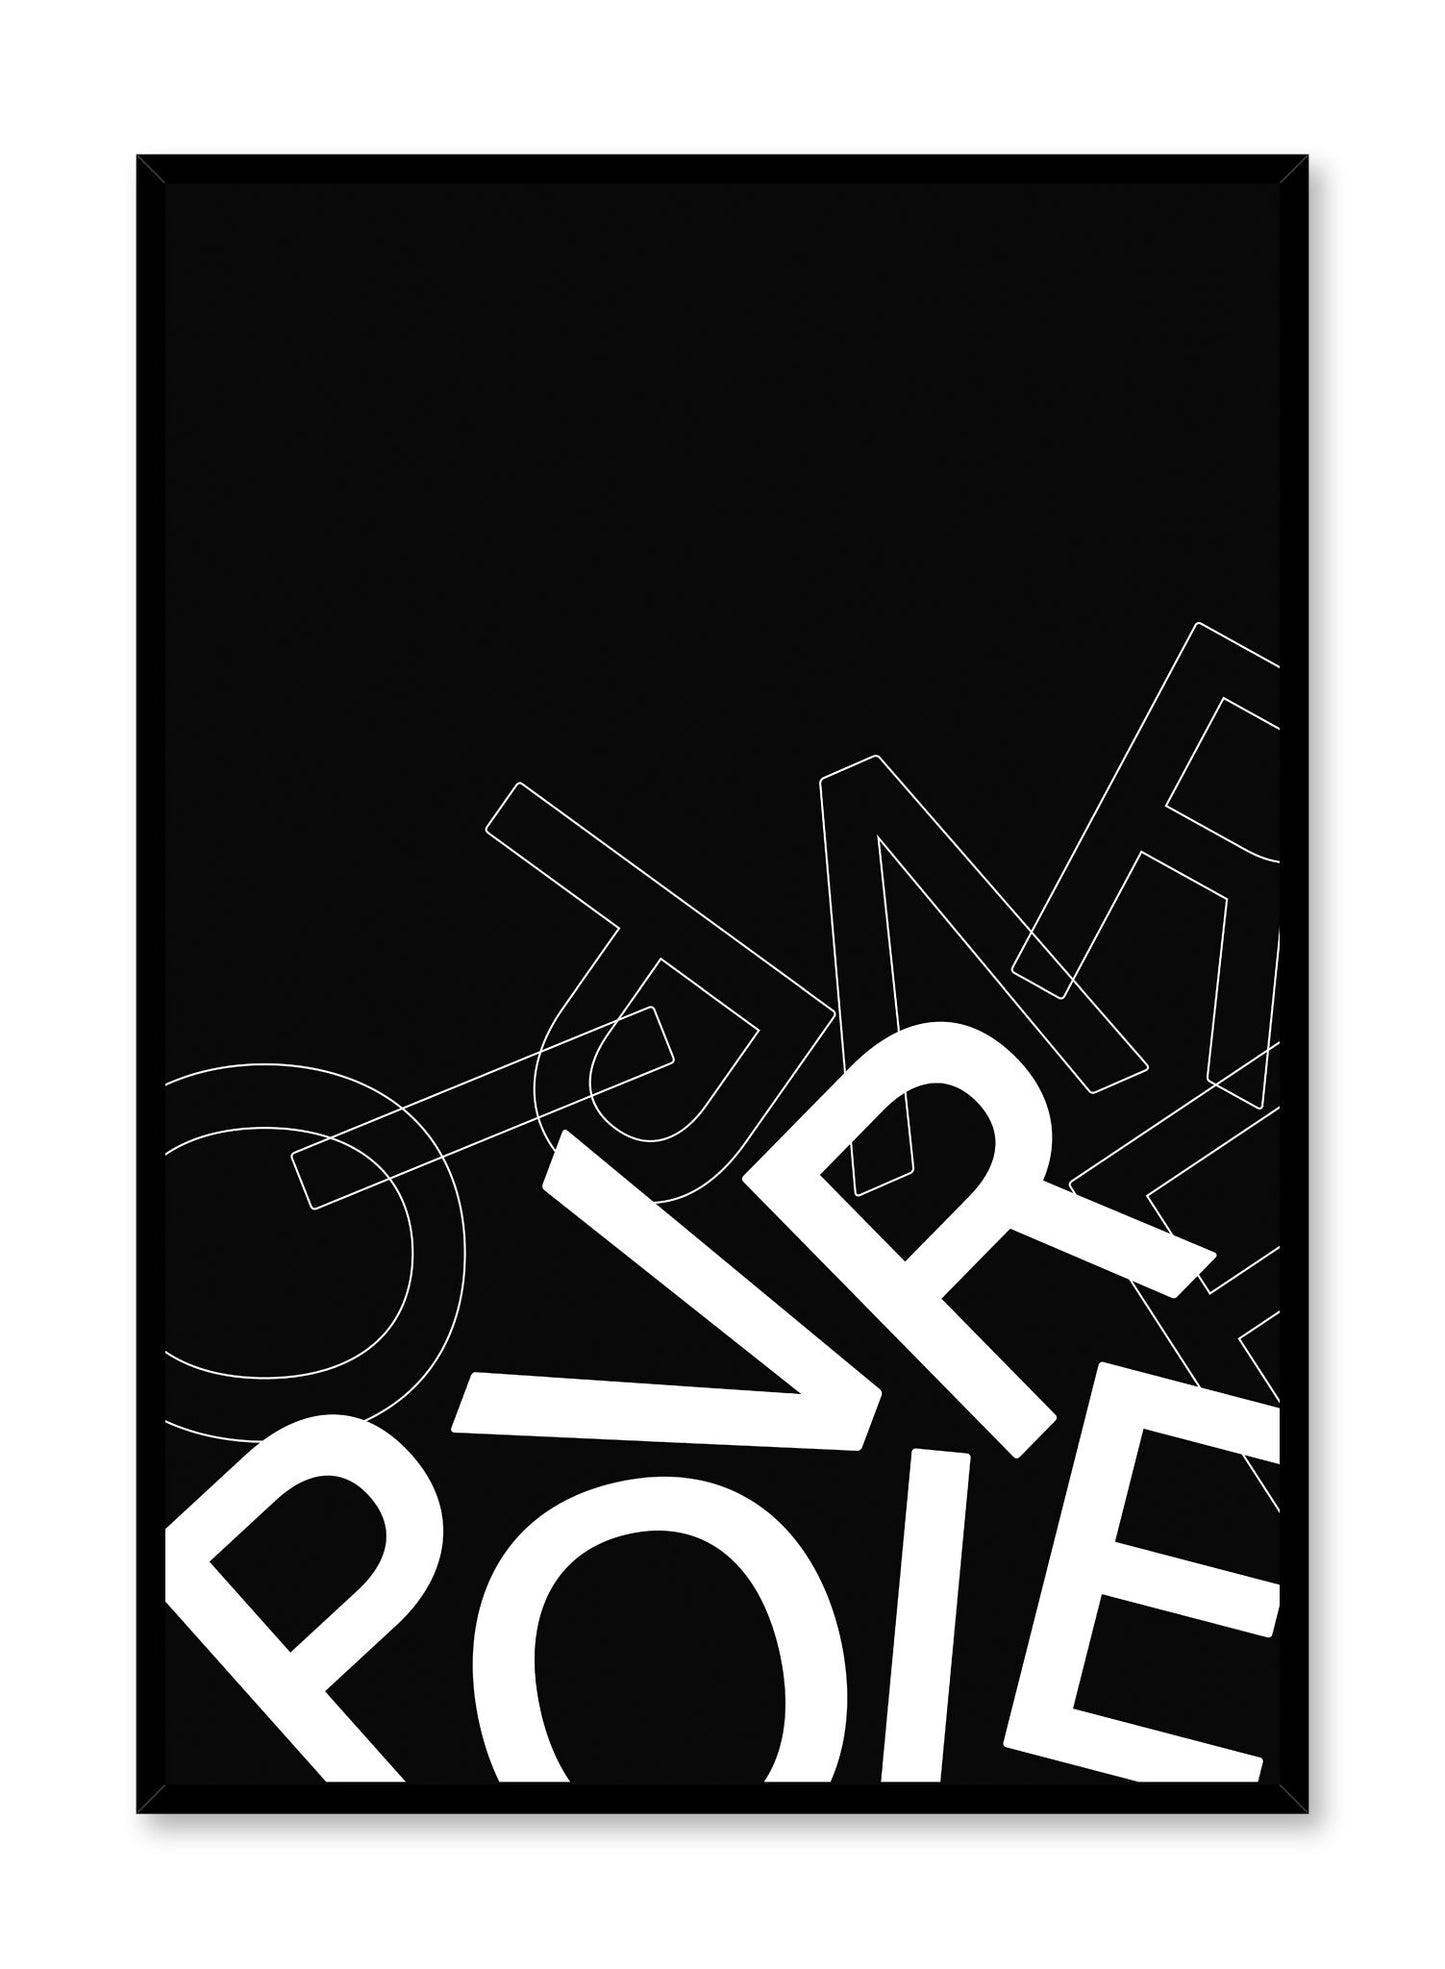 Minimalist poster by Opposite Wall with Poivre black and white typography